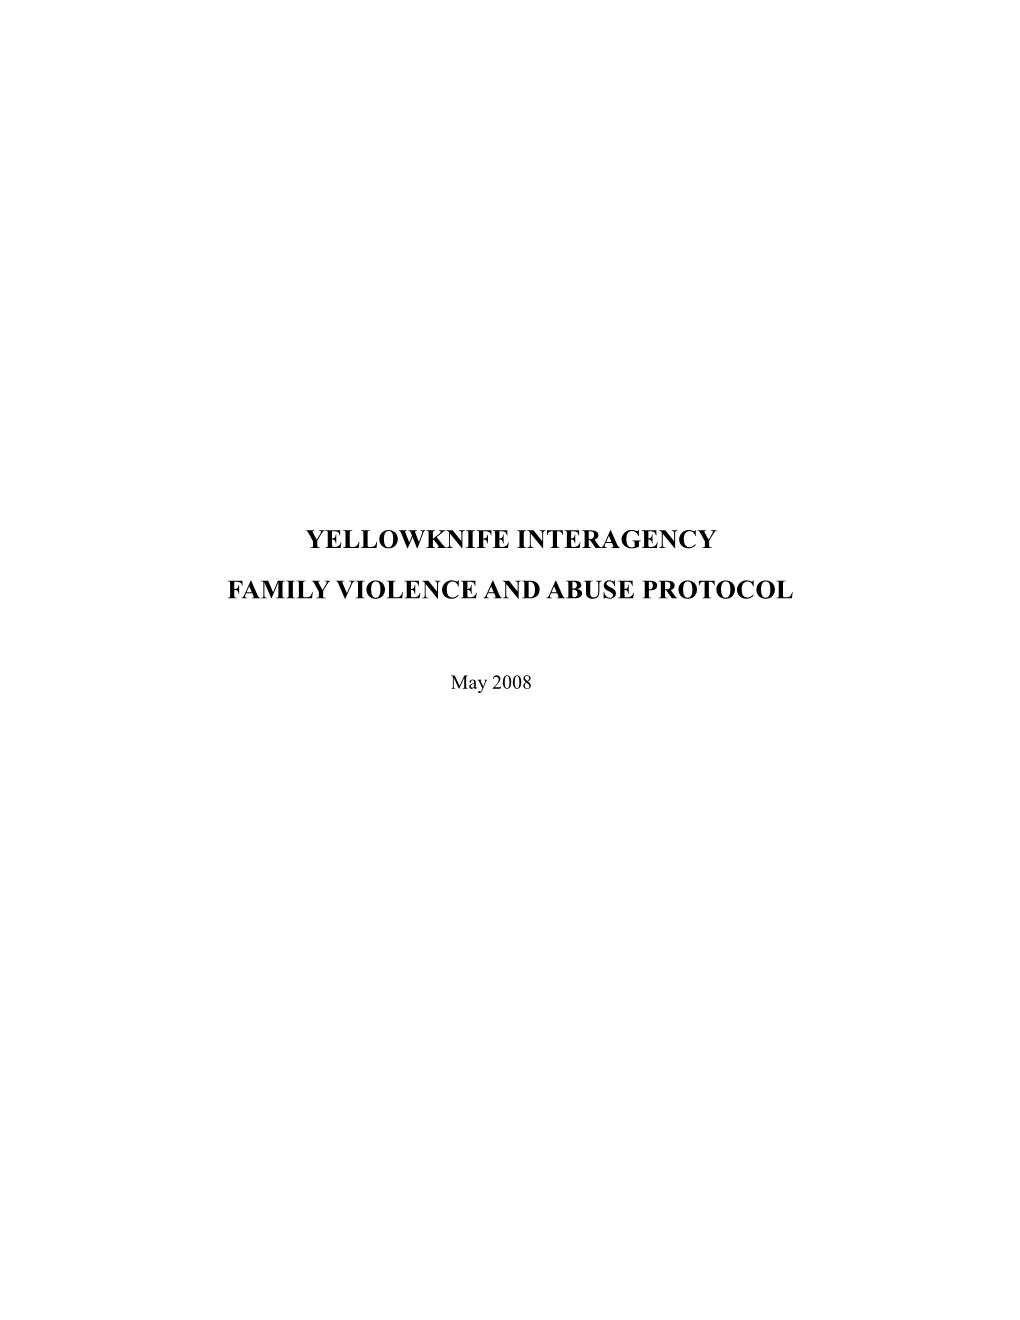 Yellowknife Interagency Family Violence and Abuse Protocol